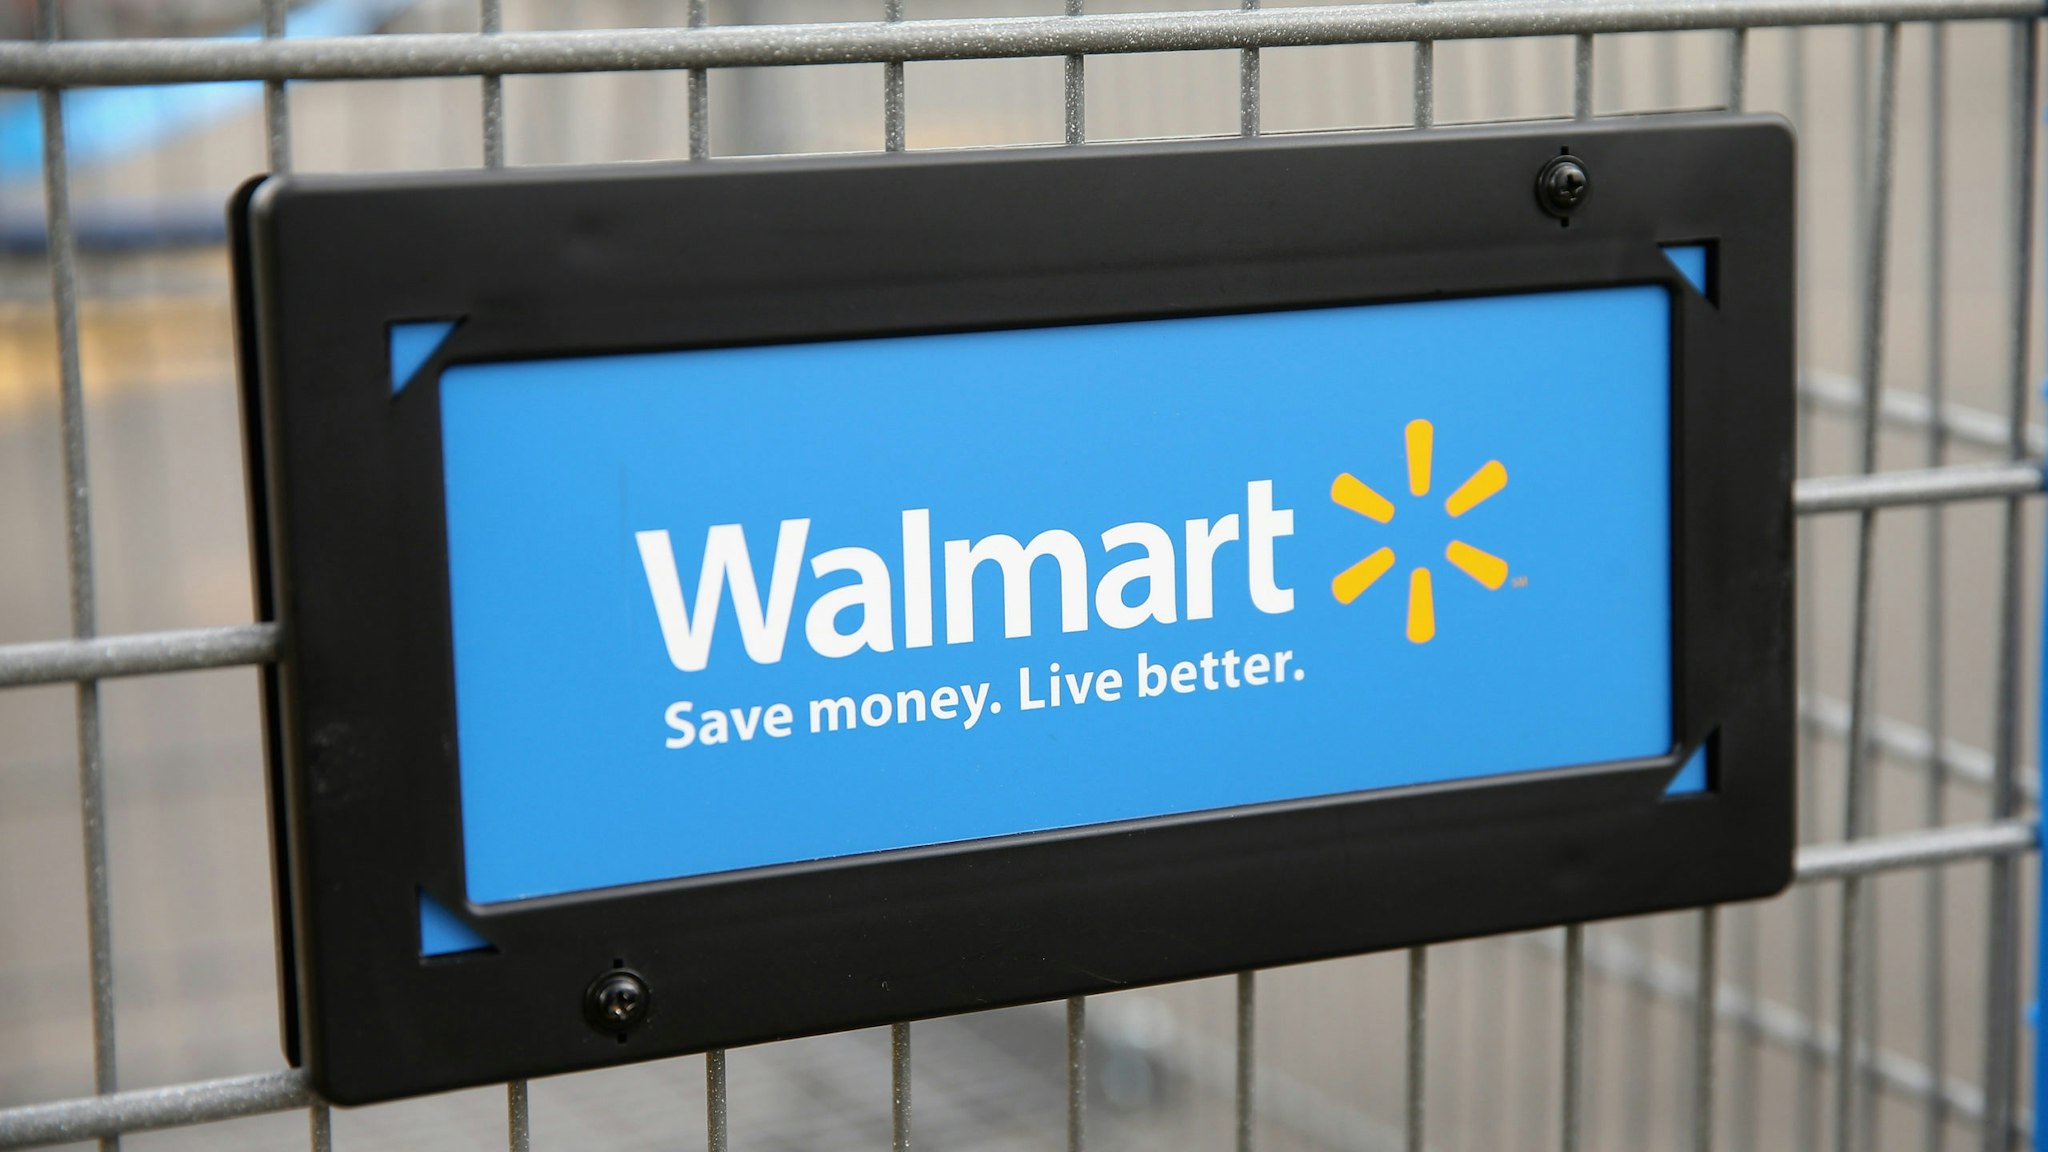 CHICAGO, IL - AUGUST 15: The Walmart logo is displayed on a shopping cart at a Walmart store on August 15, 2013 in Chicago, Illinois. Walmart, the world's largest retailer, reported a surprise decline in second-quarter same-store sales today. The retailer also cut its revenue and profit forecasts for the fiscal year.